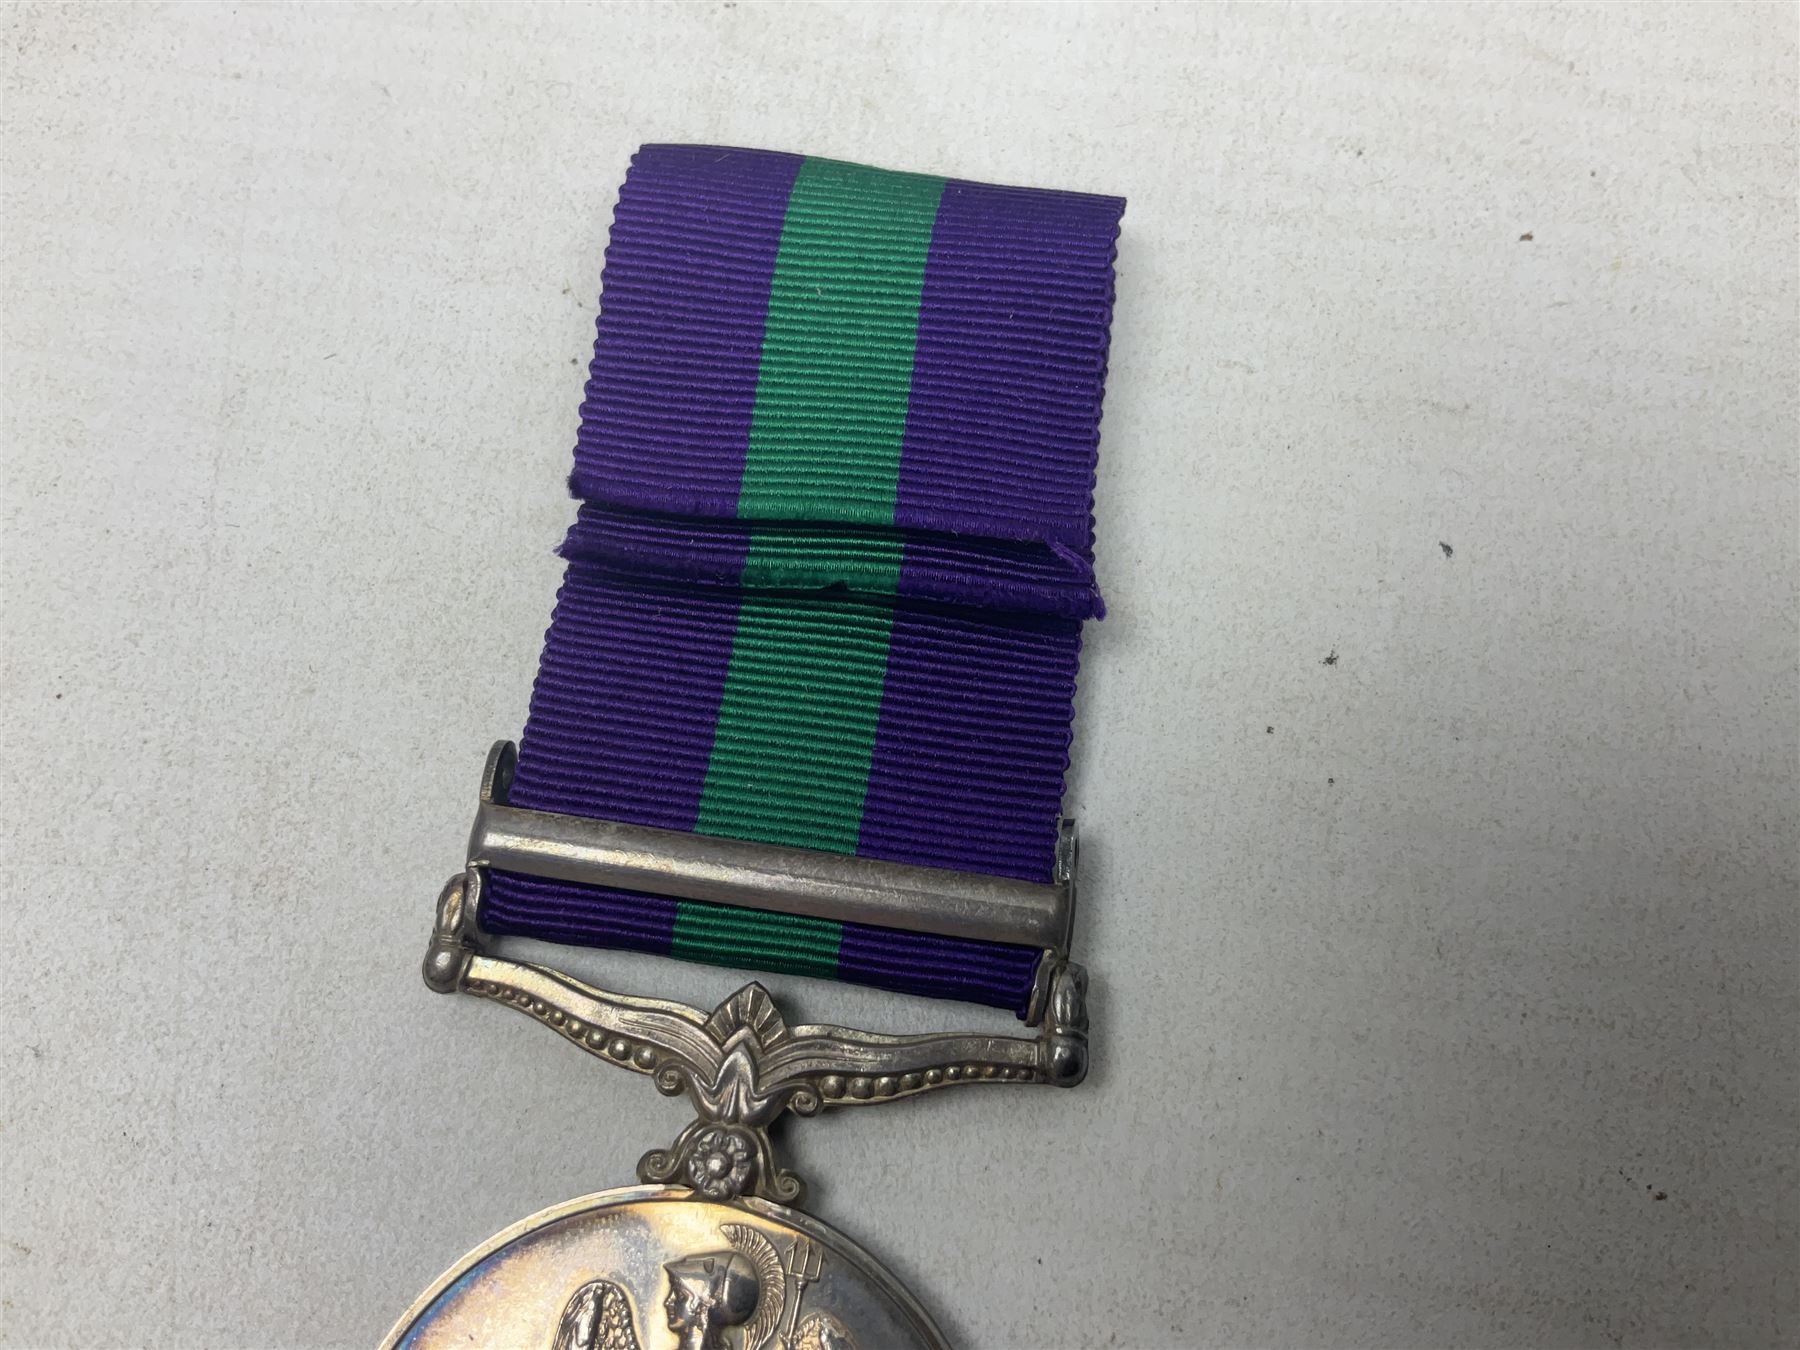 George VI General Service Medal with Palestine 1945-48 clasp awarded to 19117460 Pte. P. Tilmouth R. - Image 6 of 8